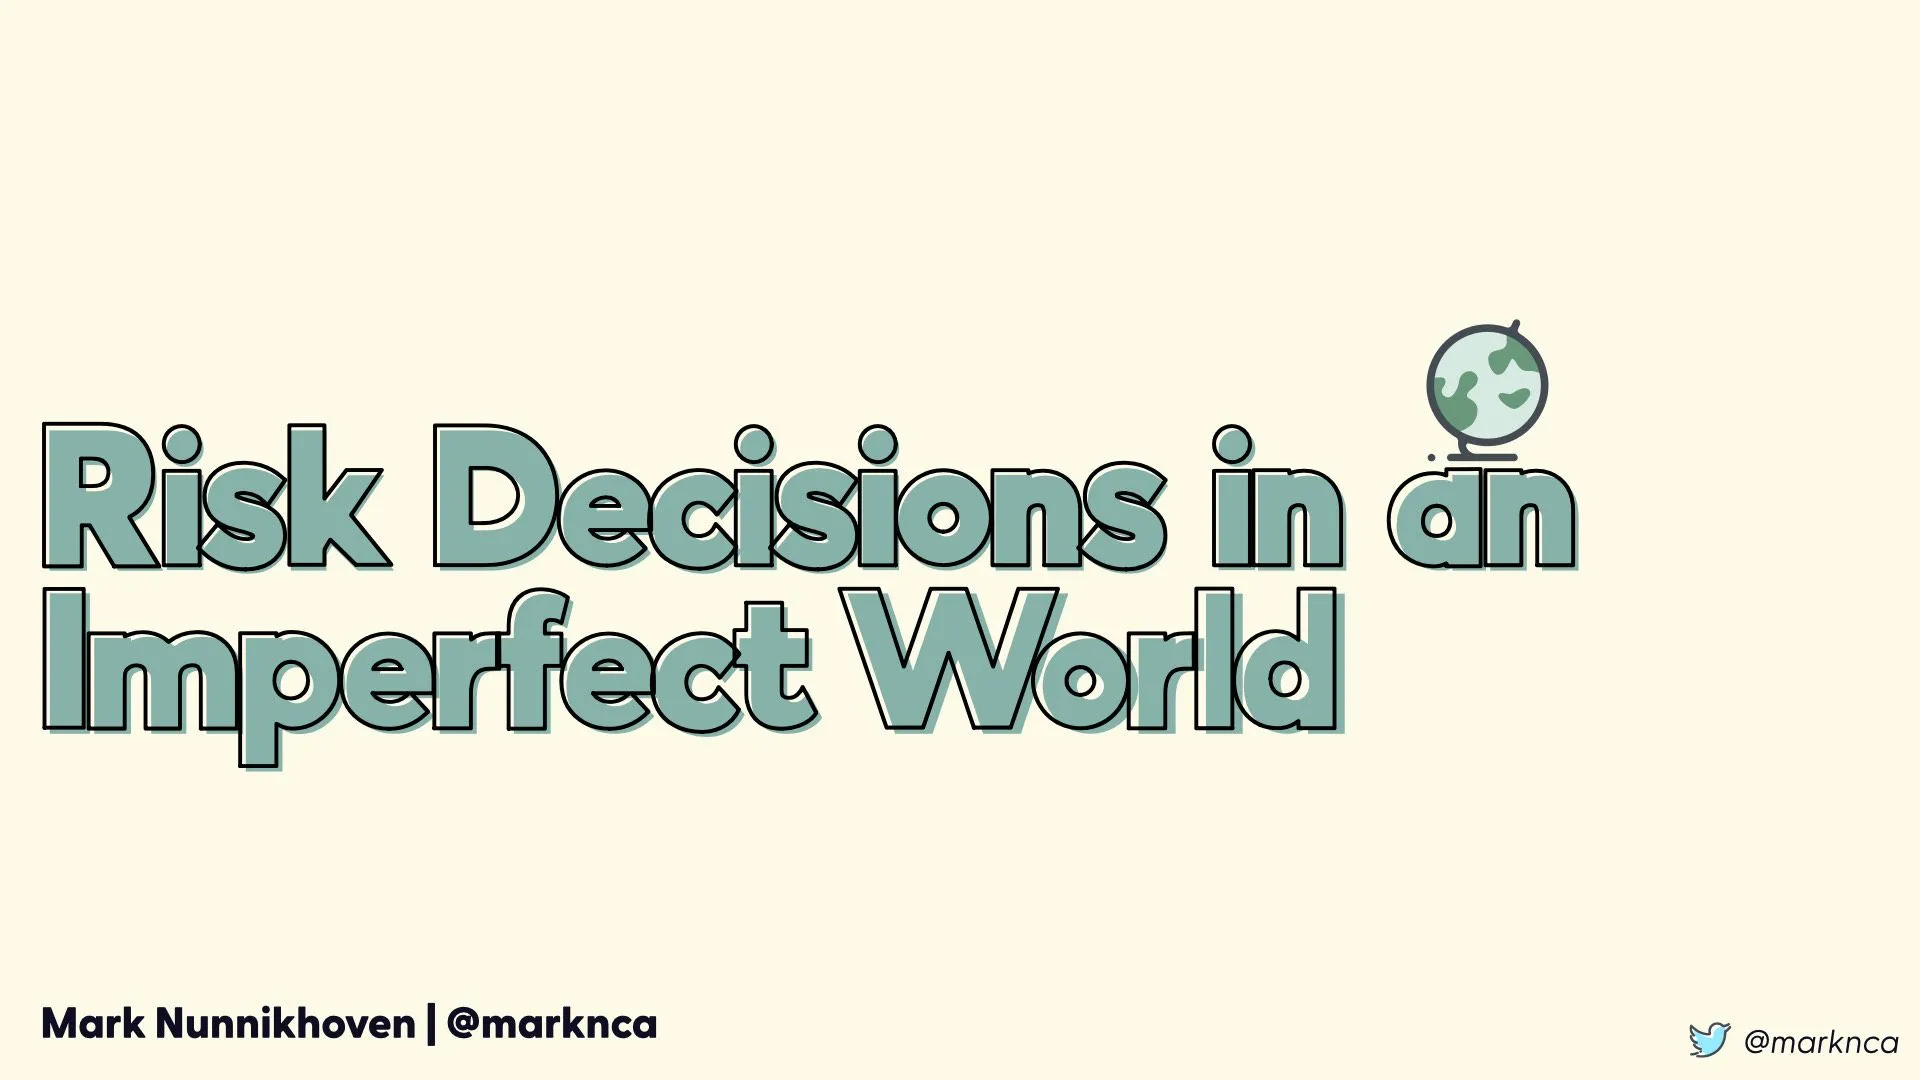 Risk Decisions in an Imperfect World